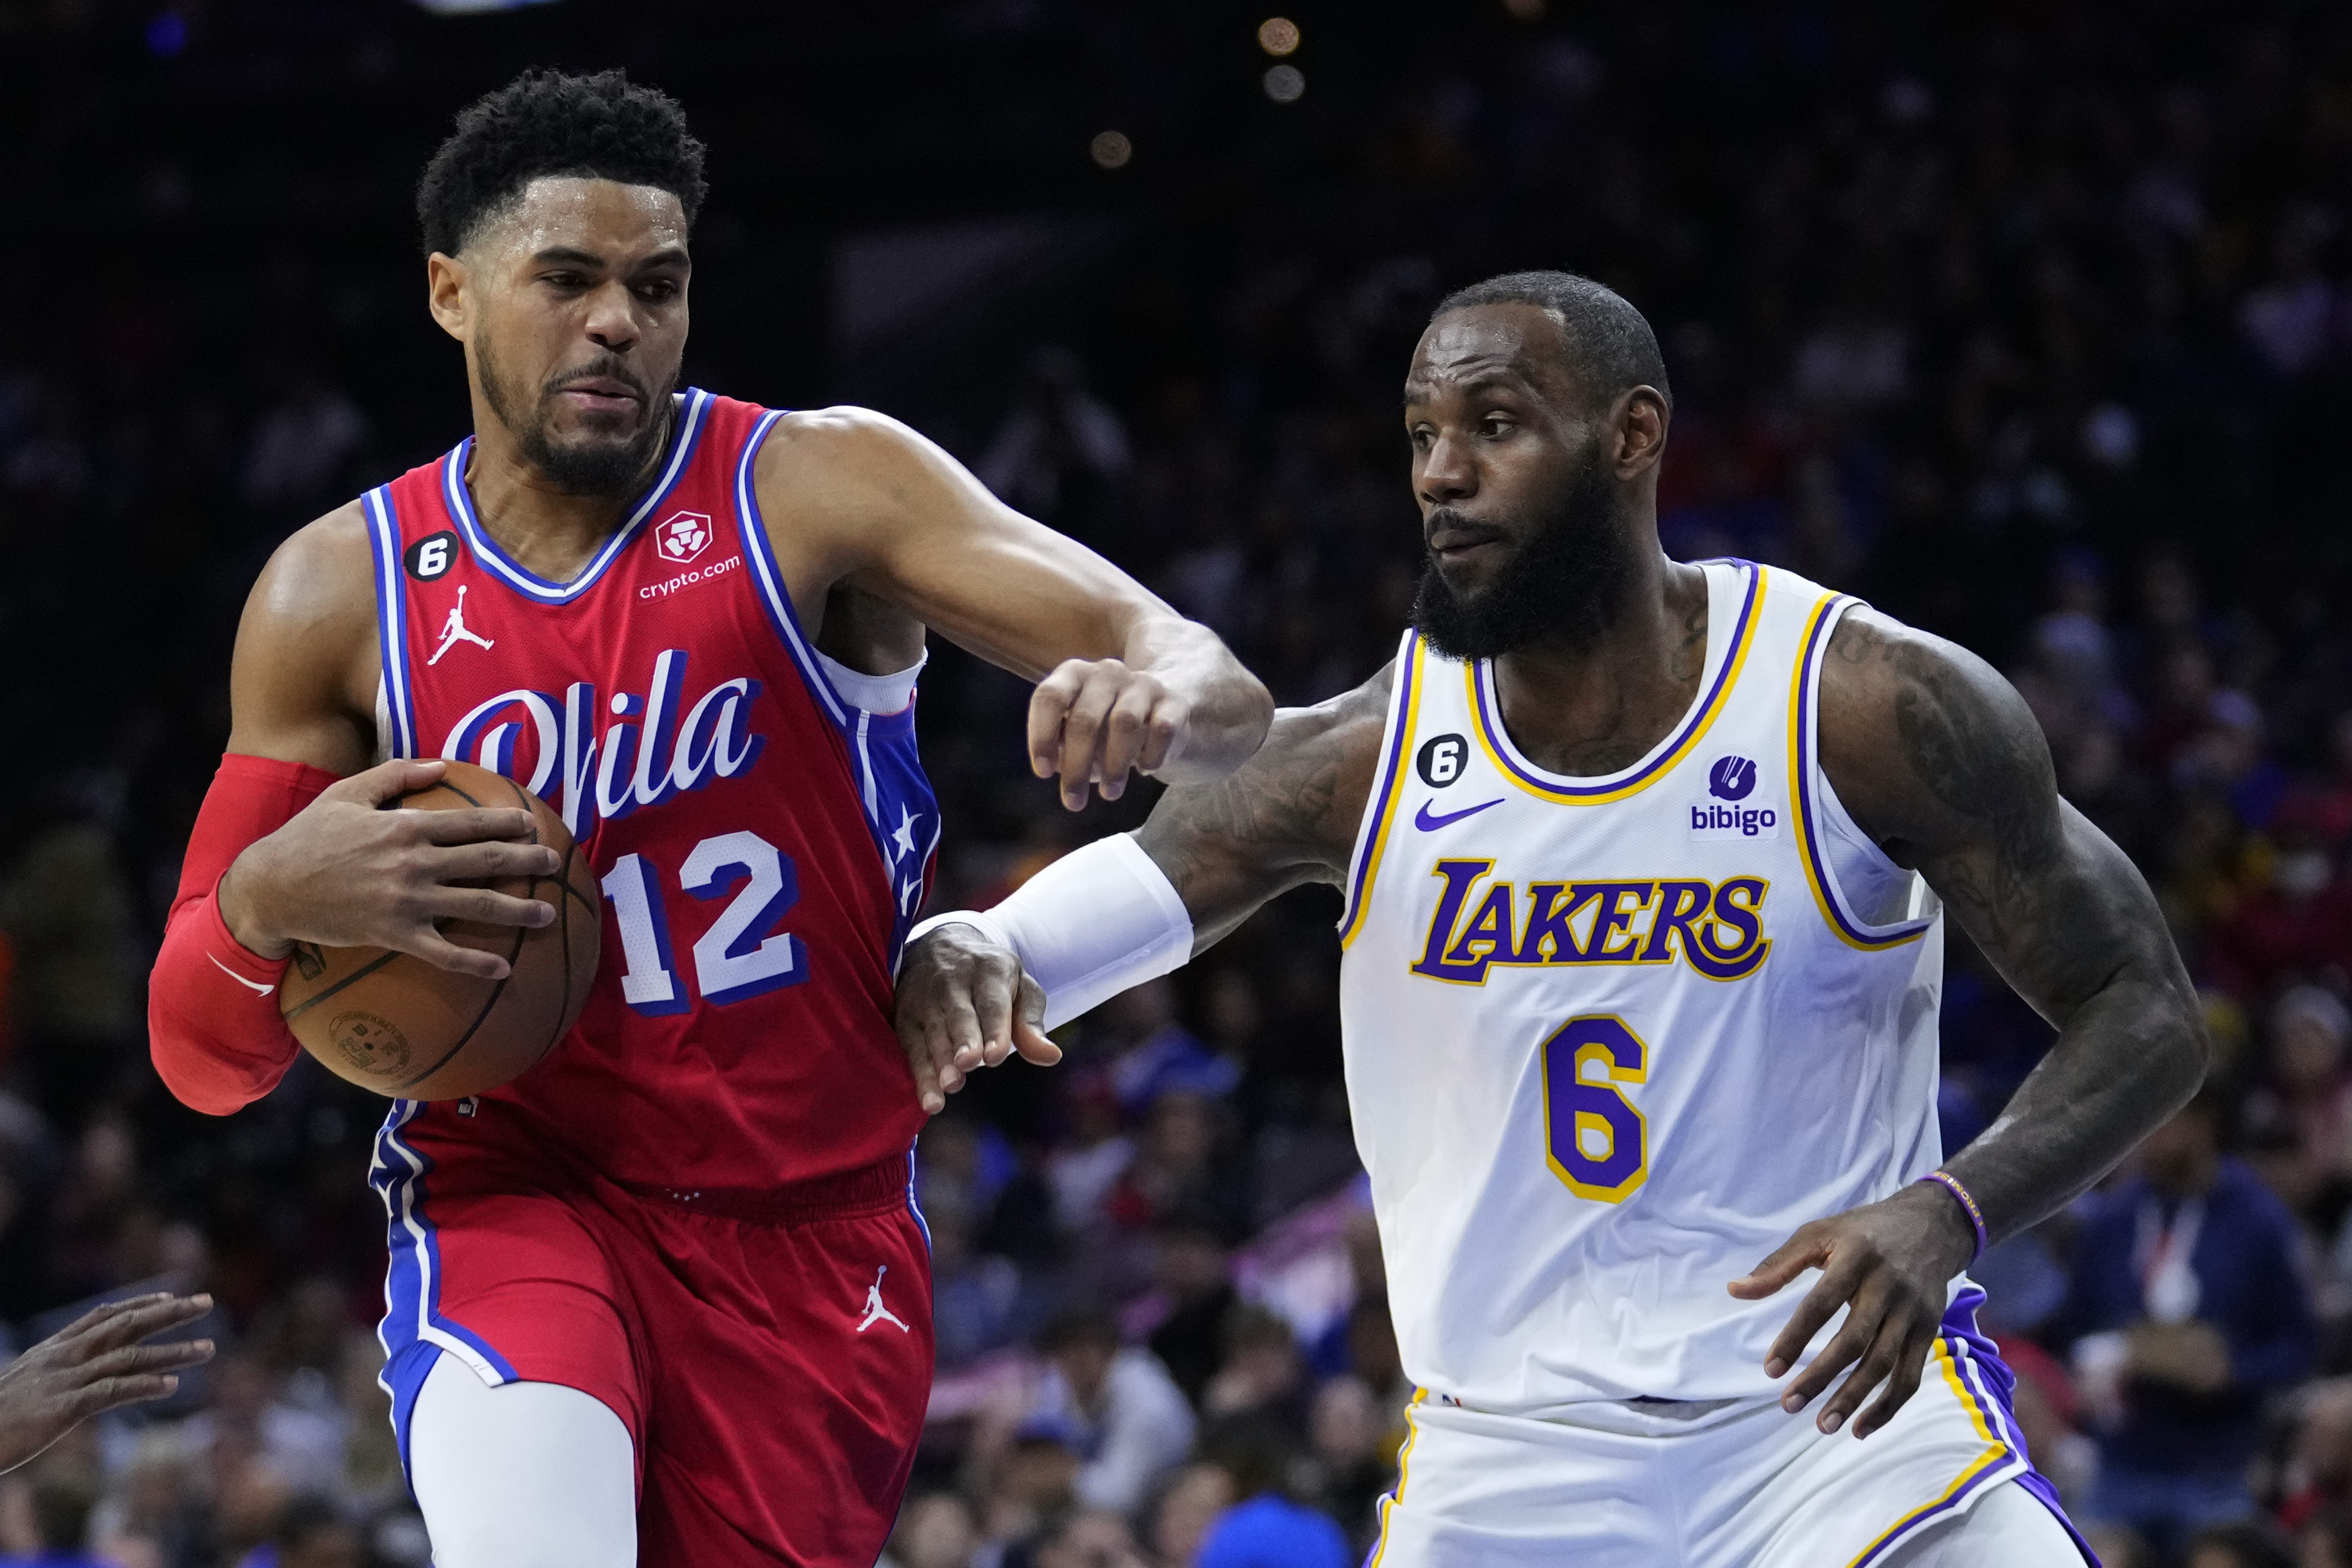 76ers recover in OT after blown lead to beat Lakers 133-122